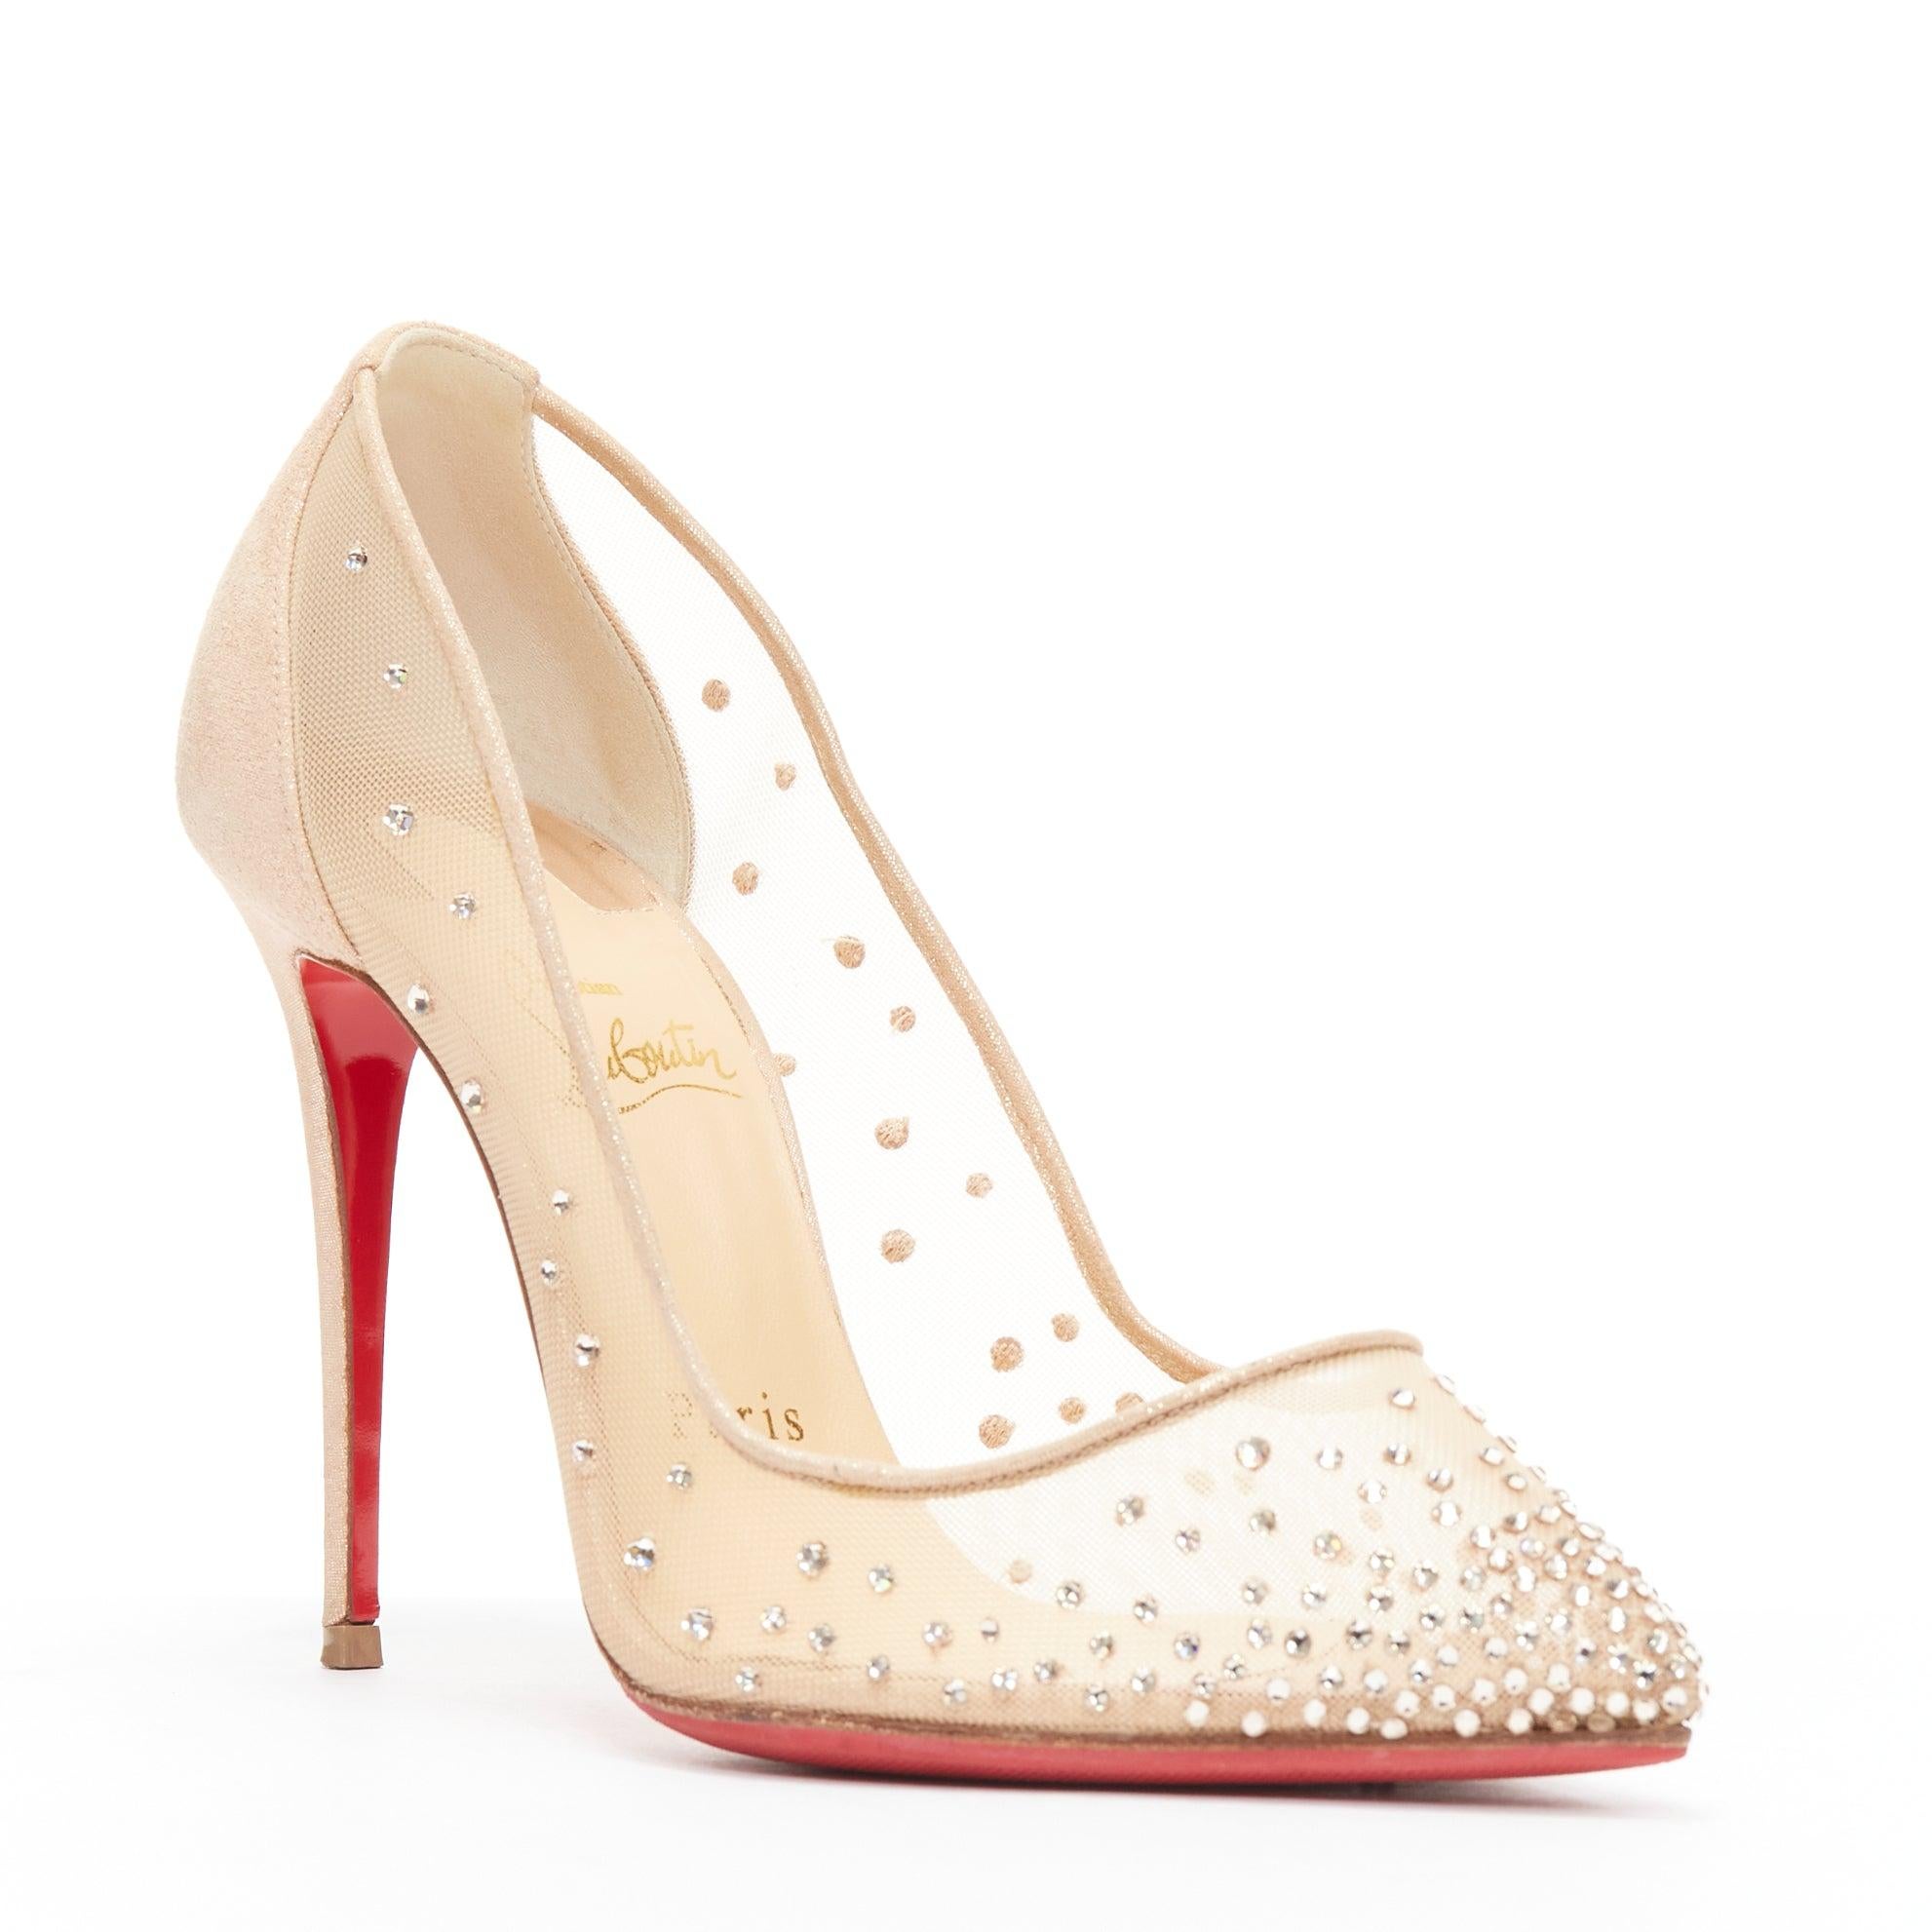 CHRISTIAN LOUBOUTIN Follies Mesh Strass 100 nude crystal gradient pigalle EU36.5
Reference: TGAS/D00892
Brand: Christian Louboutin
Model: Follies Mesh Strass 100
Material: Mesh, Fabric
Color: Nude
Pattern: Solid
Lining: Brown Leather
Extra Details: